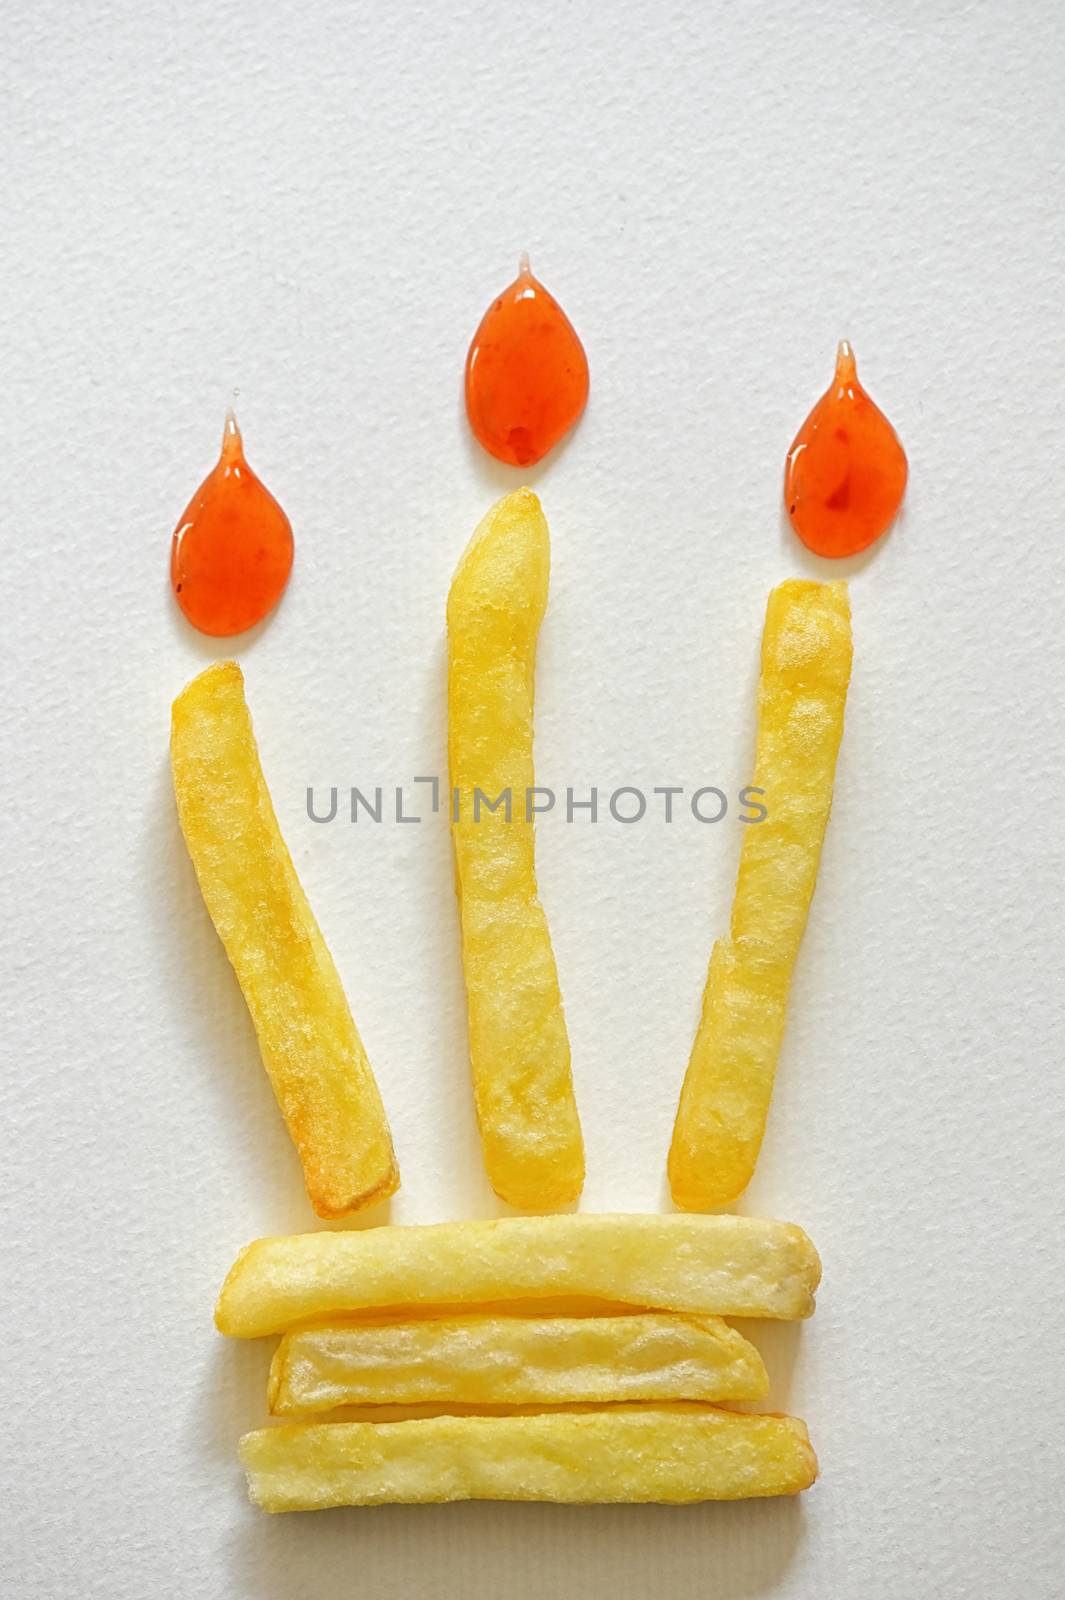 Birthday Cake With Burning French Fries Candle by mady70